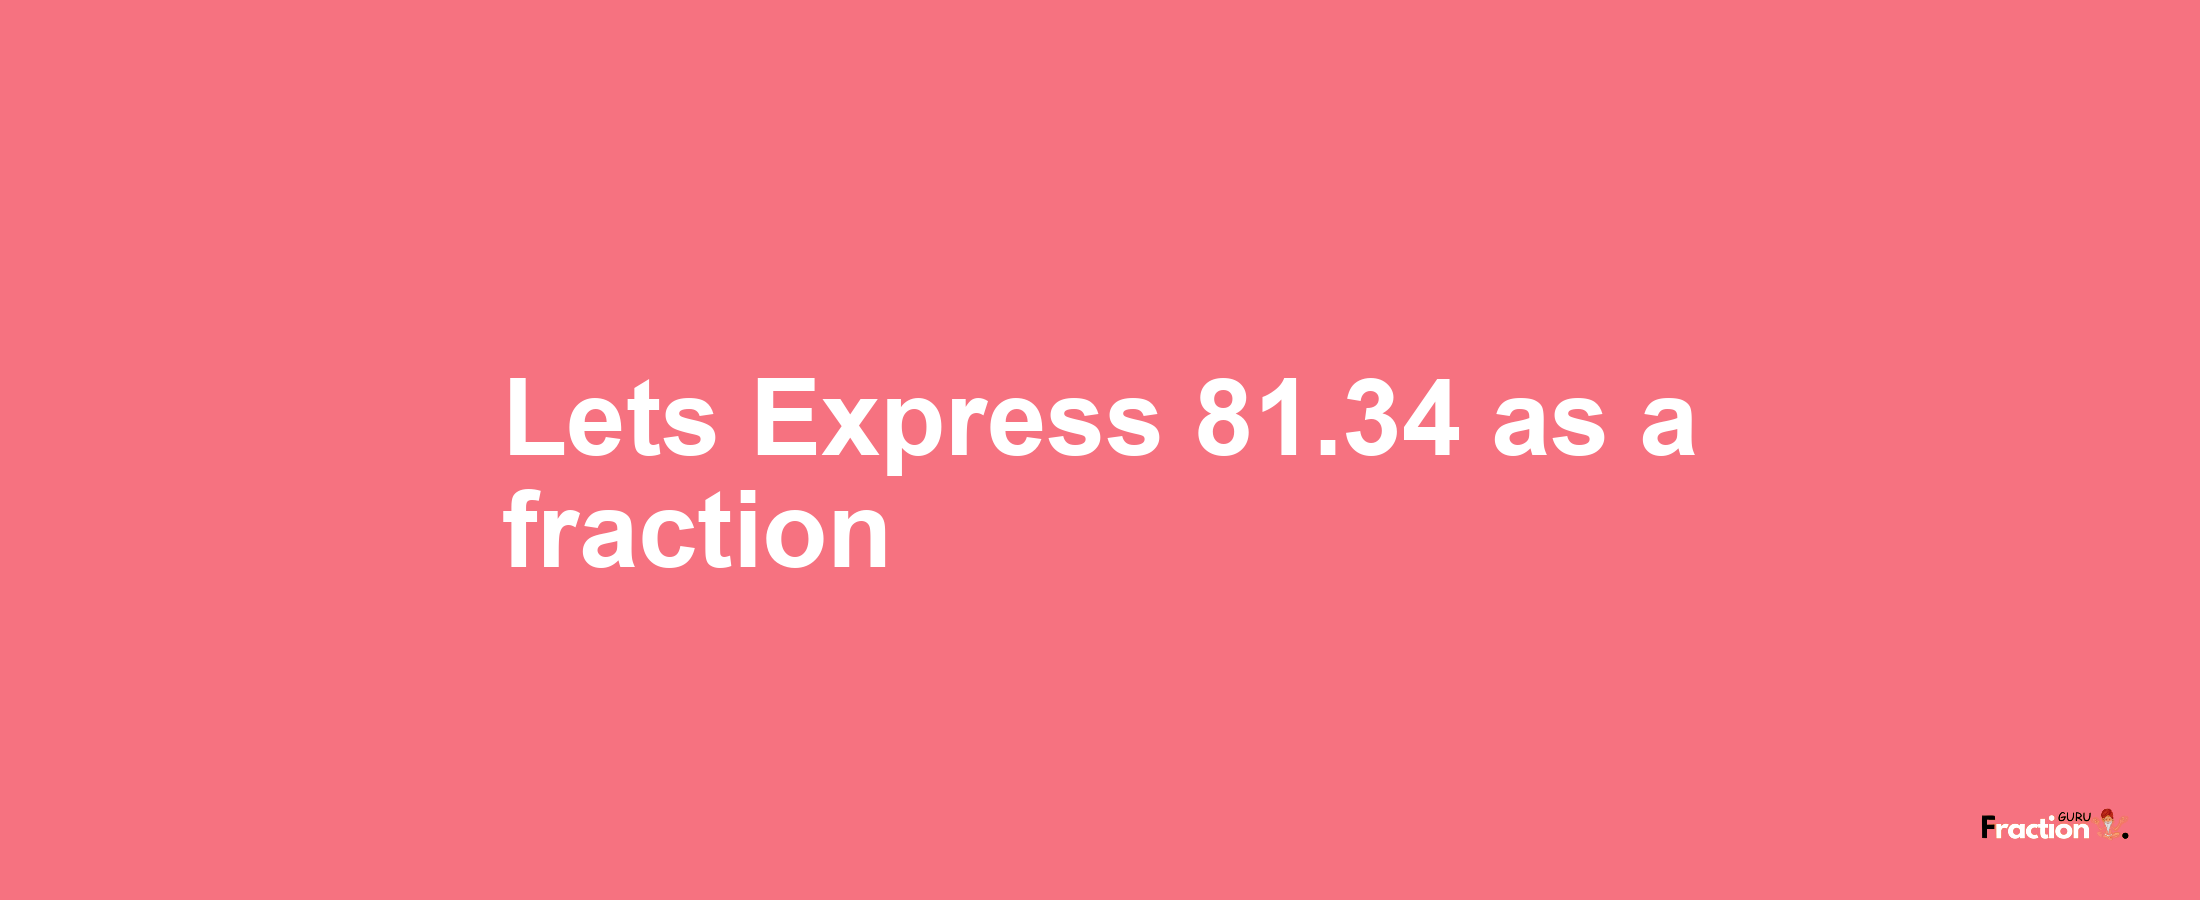 Lets Express 81.34 as afraction